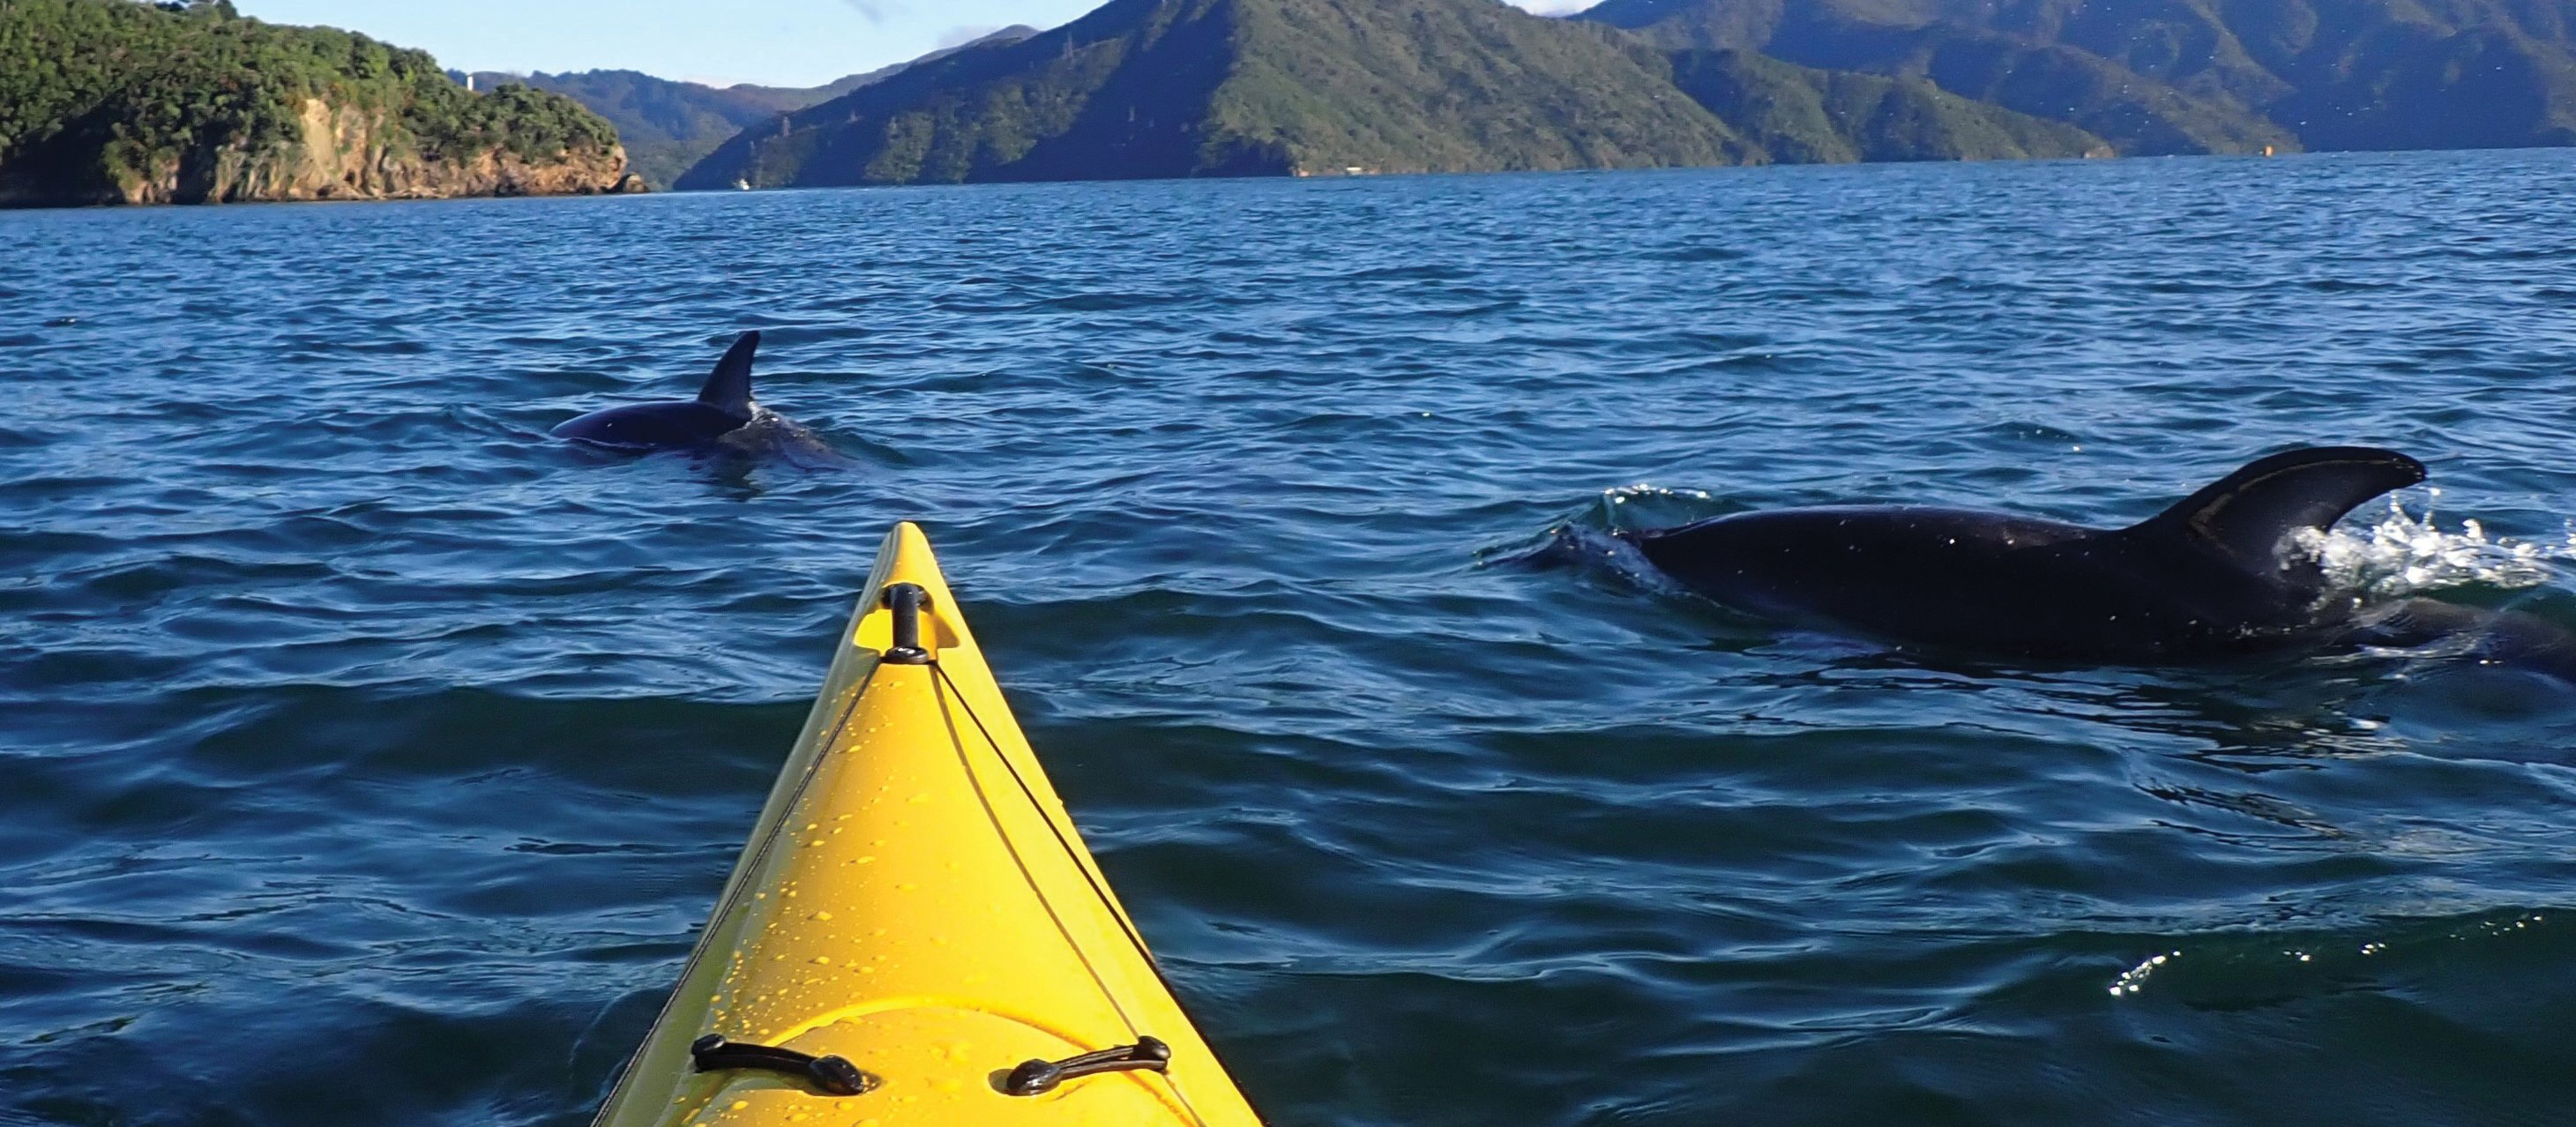 Dolphins spotted by Graeme Smith while sea kayaking